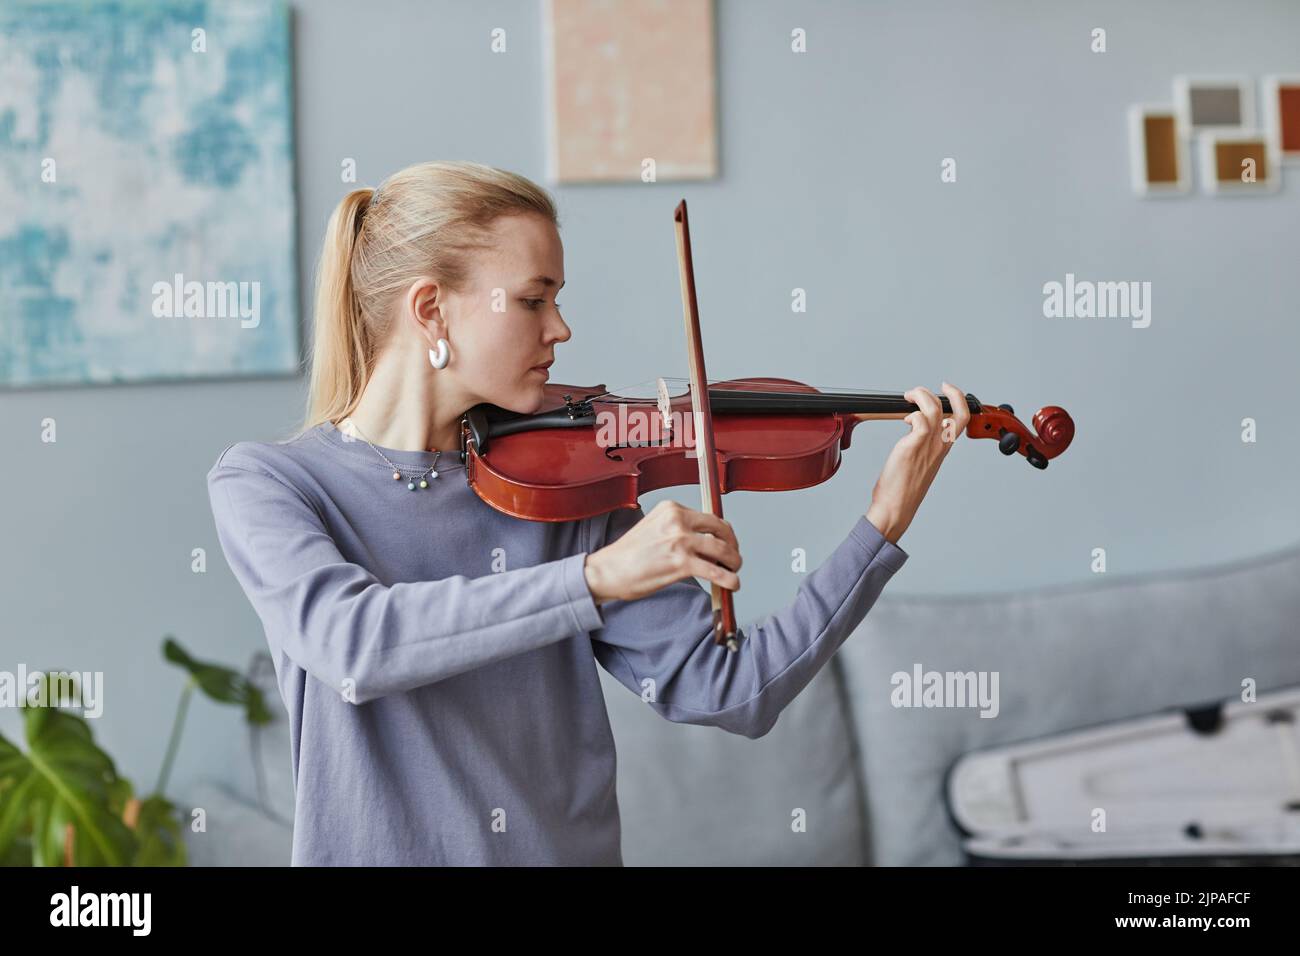 Minimal waist up portrait of young woman playing violin at home or in music studio, copy space Stock Photo